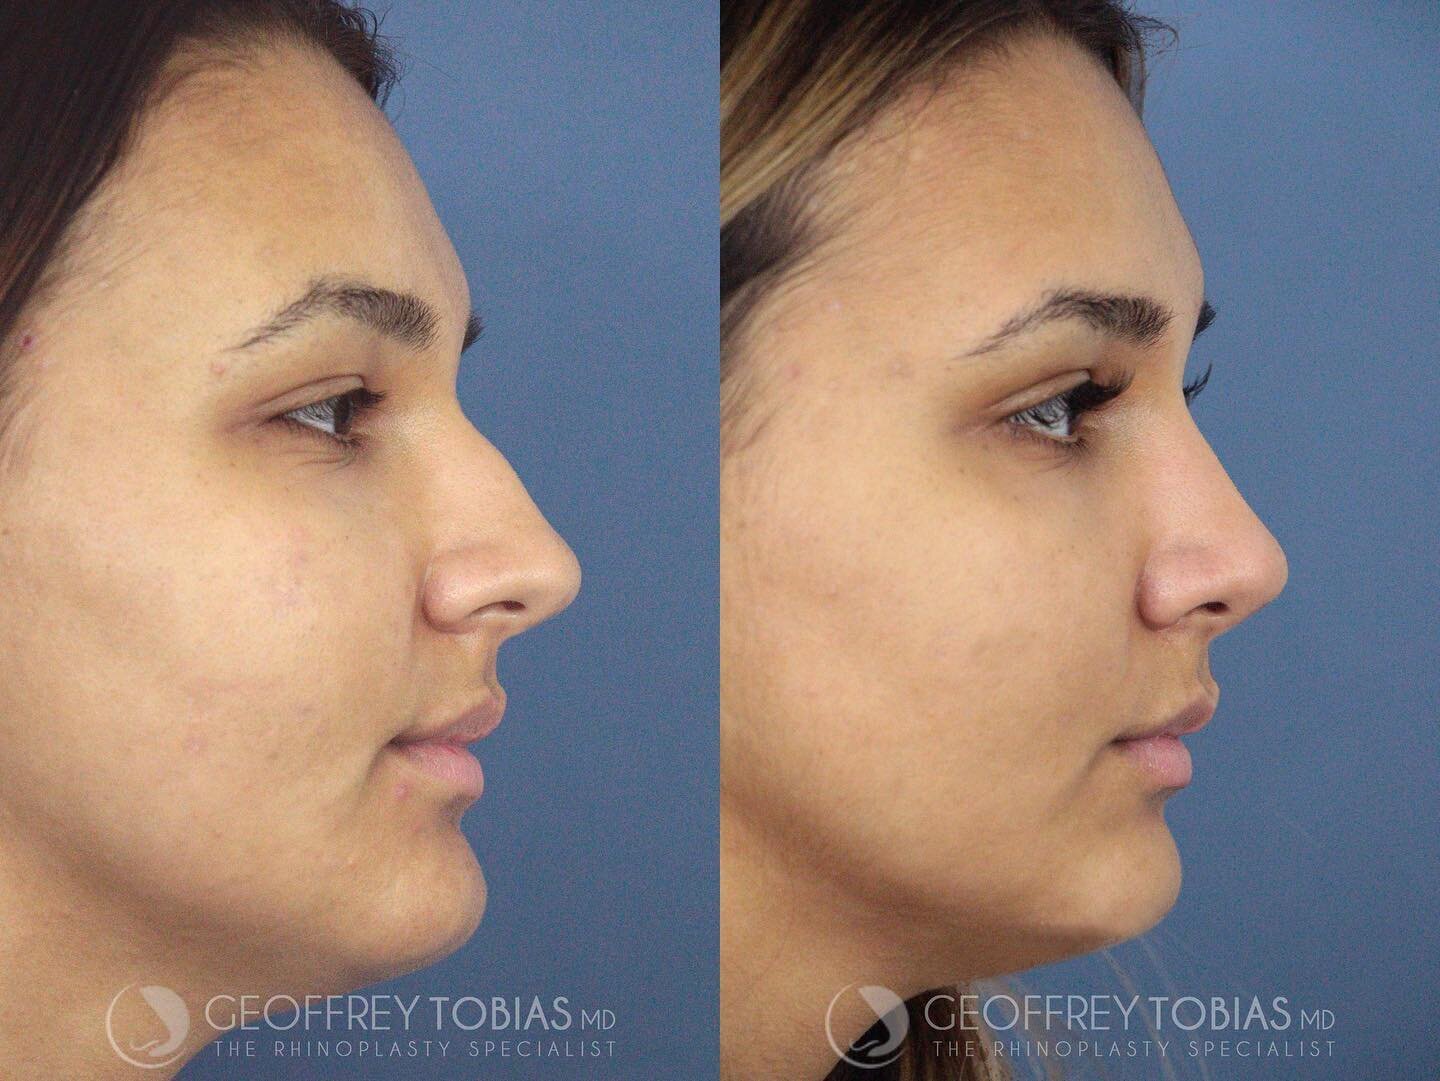 This patient had difficulty breathing and wanted a softer, feminine profile while keeping the results natural ⚡️Who wants to see the front view?
#contouredbyTobias 👃🏽
.
.
.
Time: 2.5 hours
Treatment: Closed Rhinoplasty = 🚫 NO SCARS
Downtime: Rapid